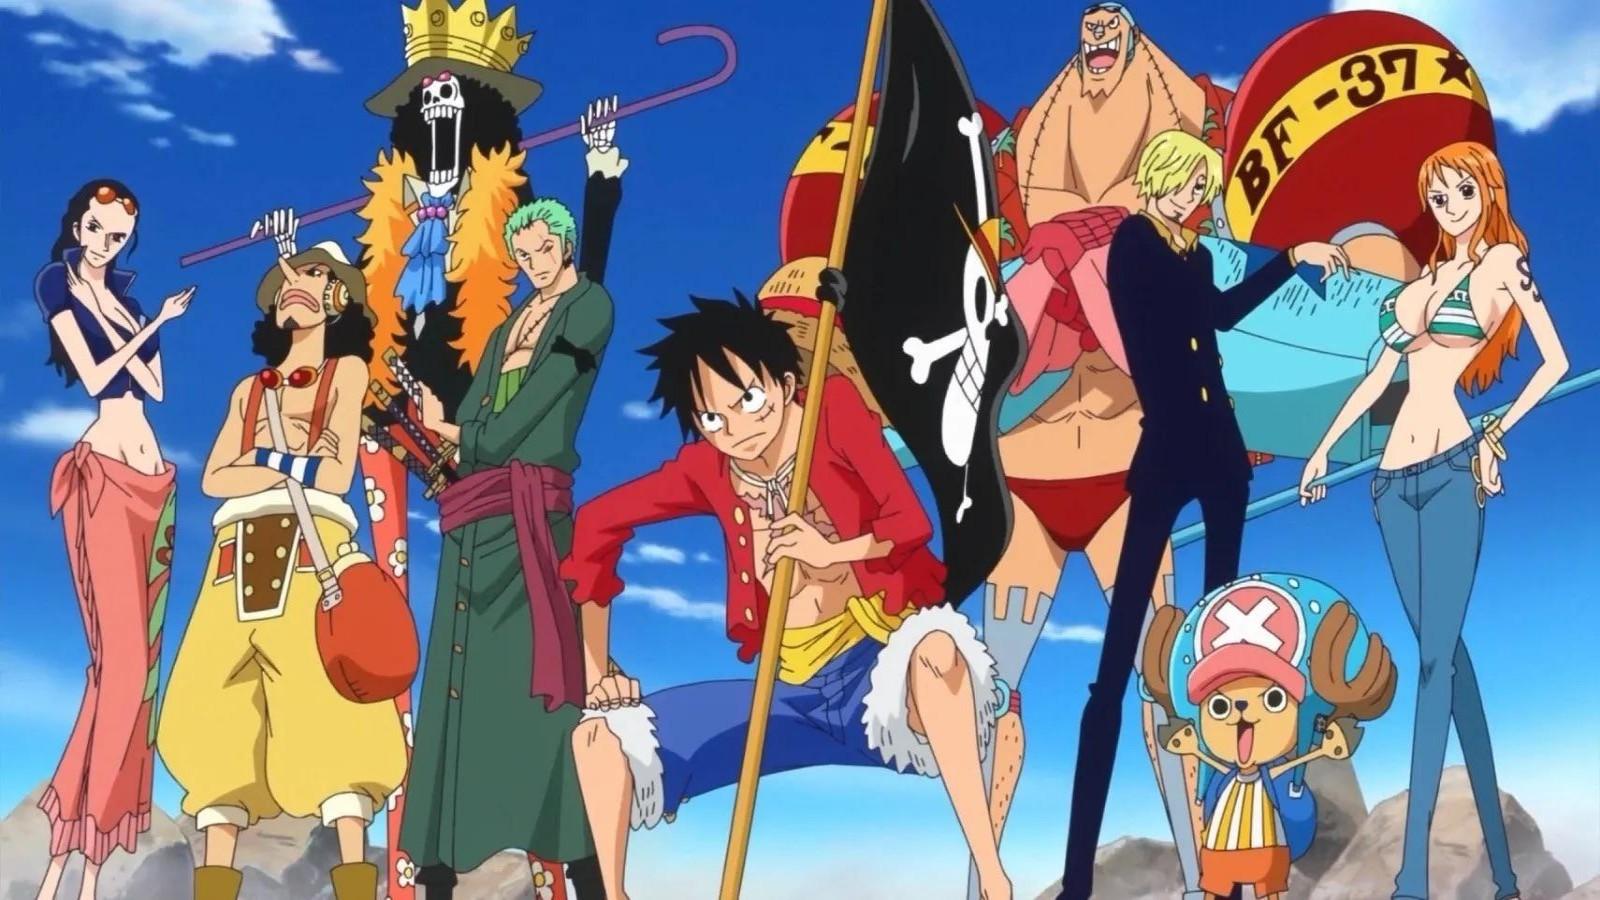 Netflix's “One Piece: Live Action” Is a Must-Watch – The Paper Wolf